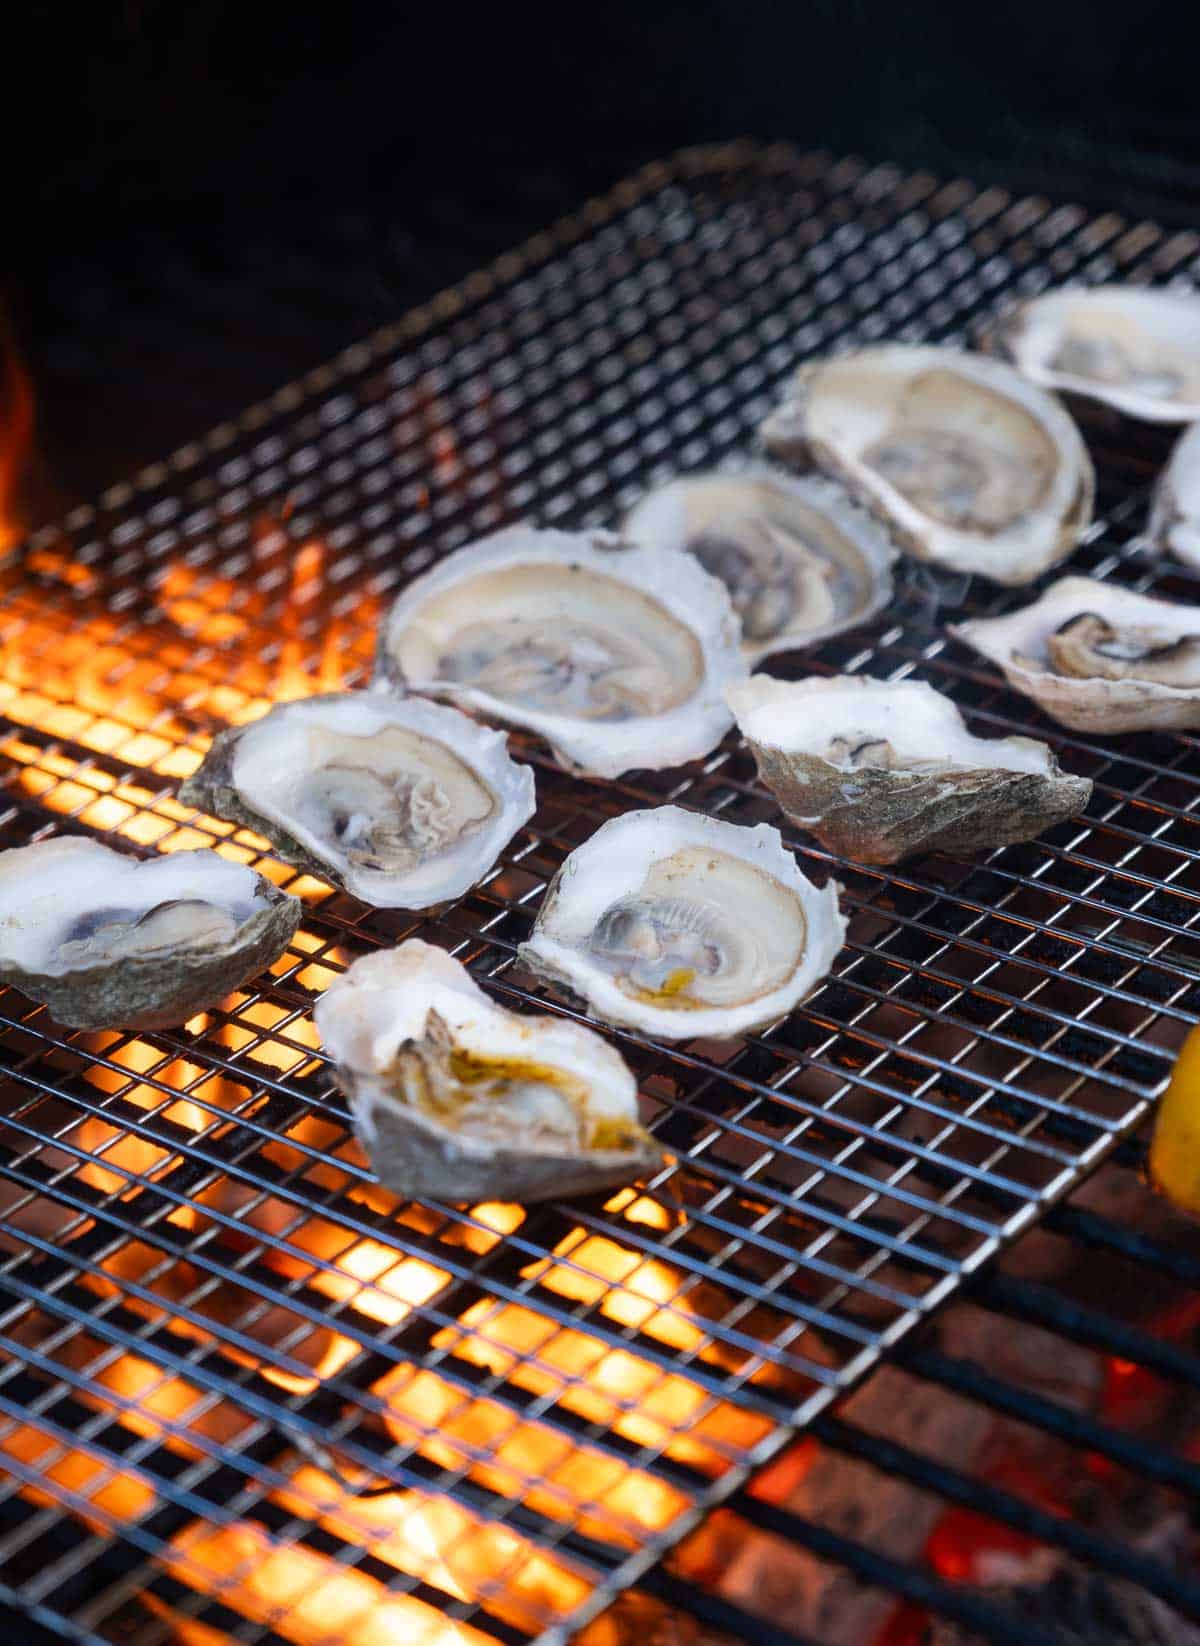 Grilled Oysters over direct heat.